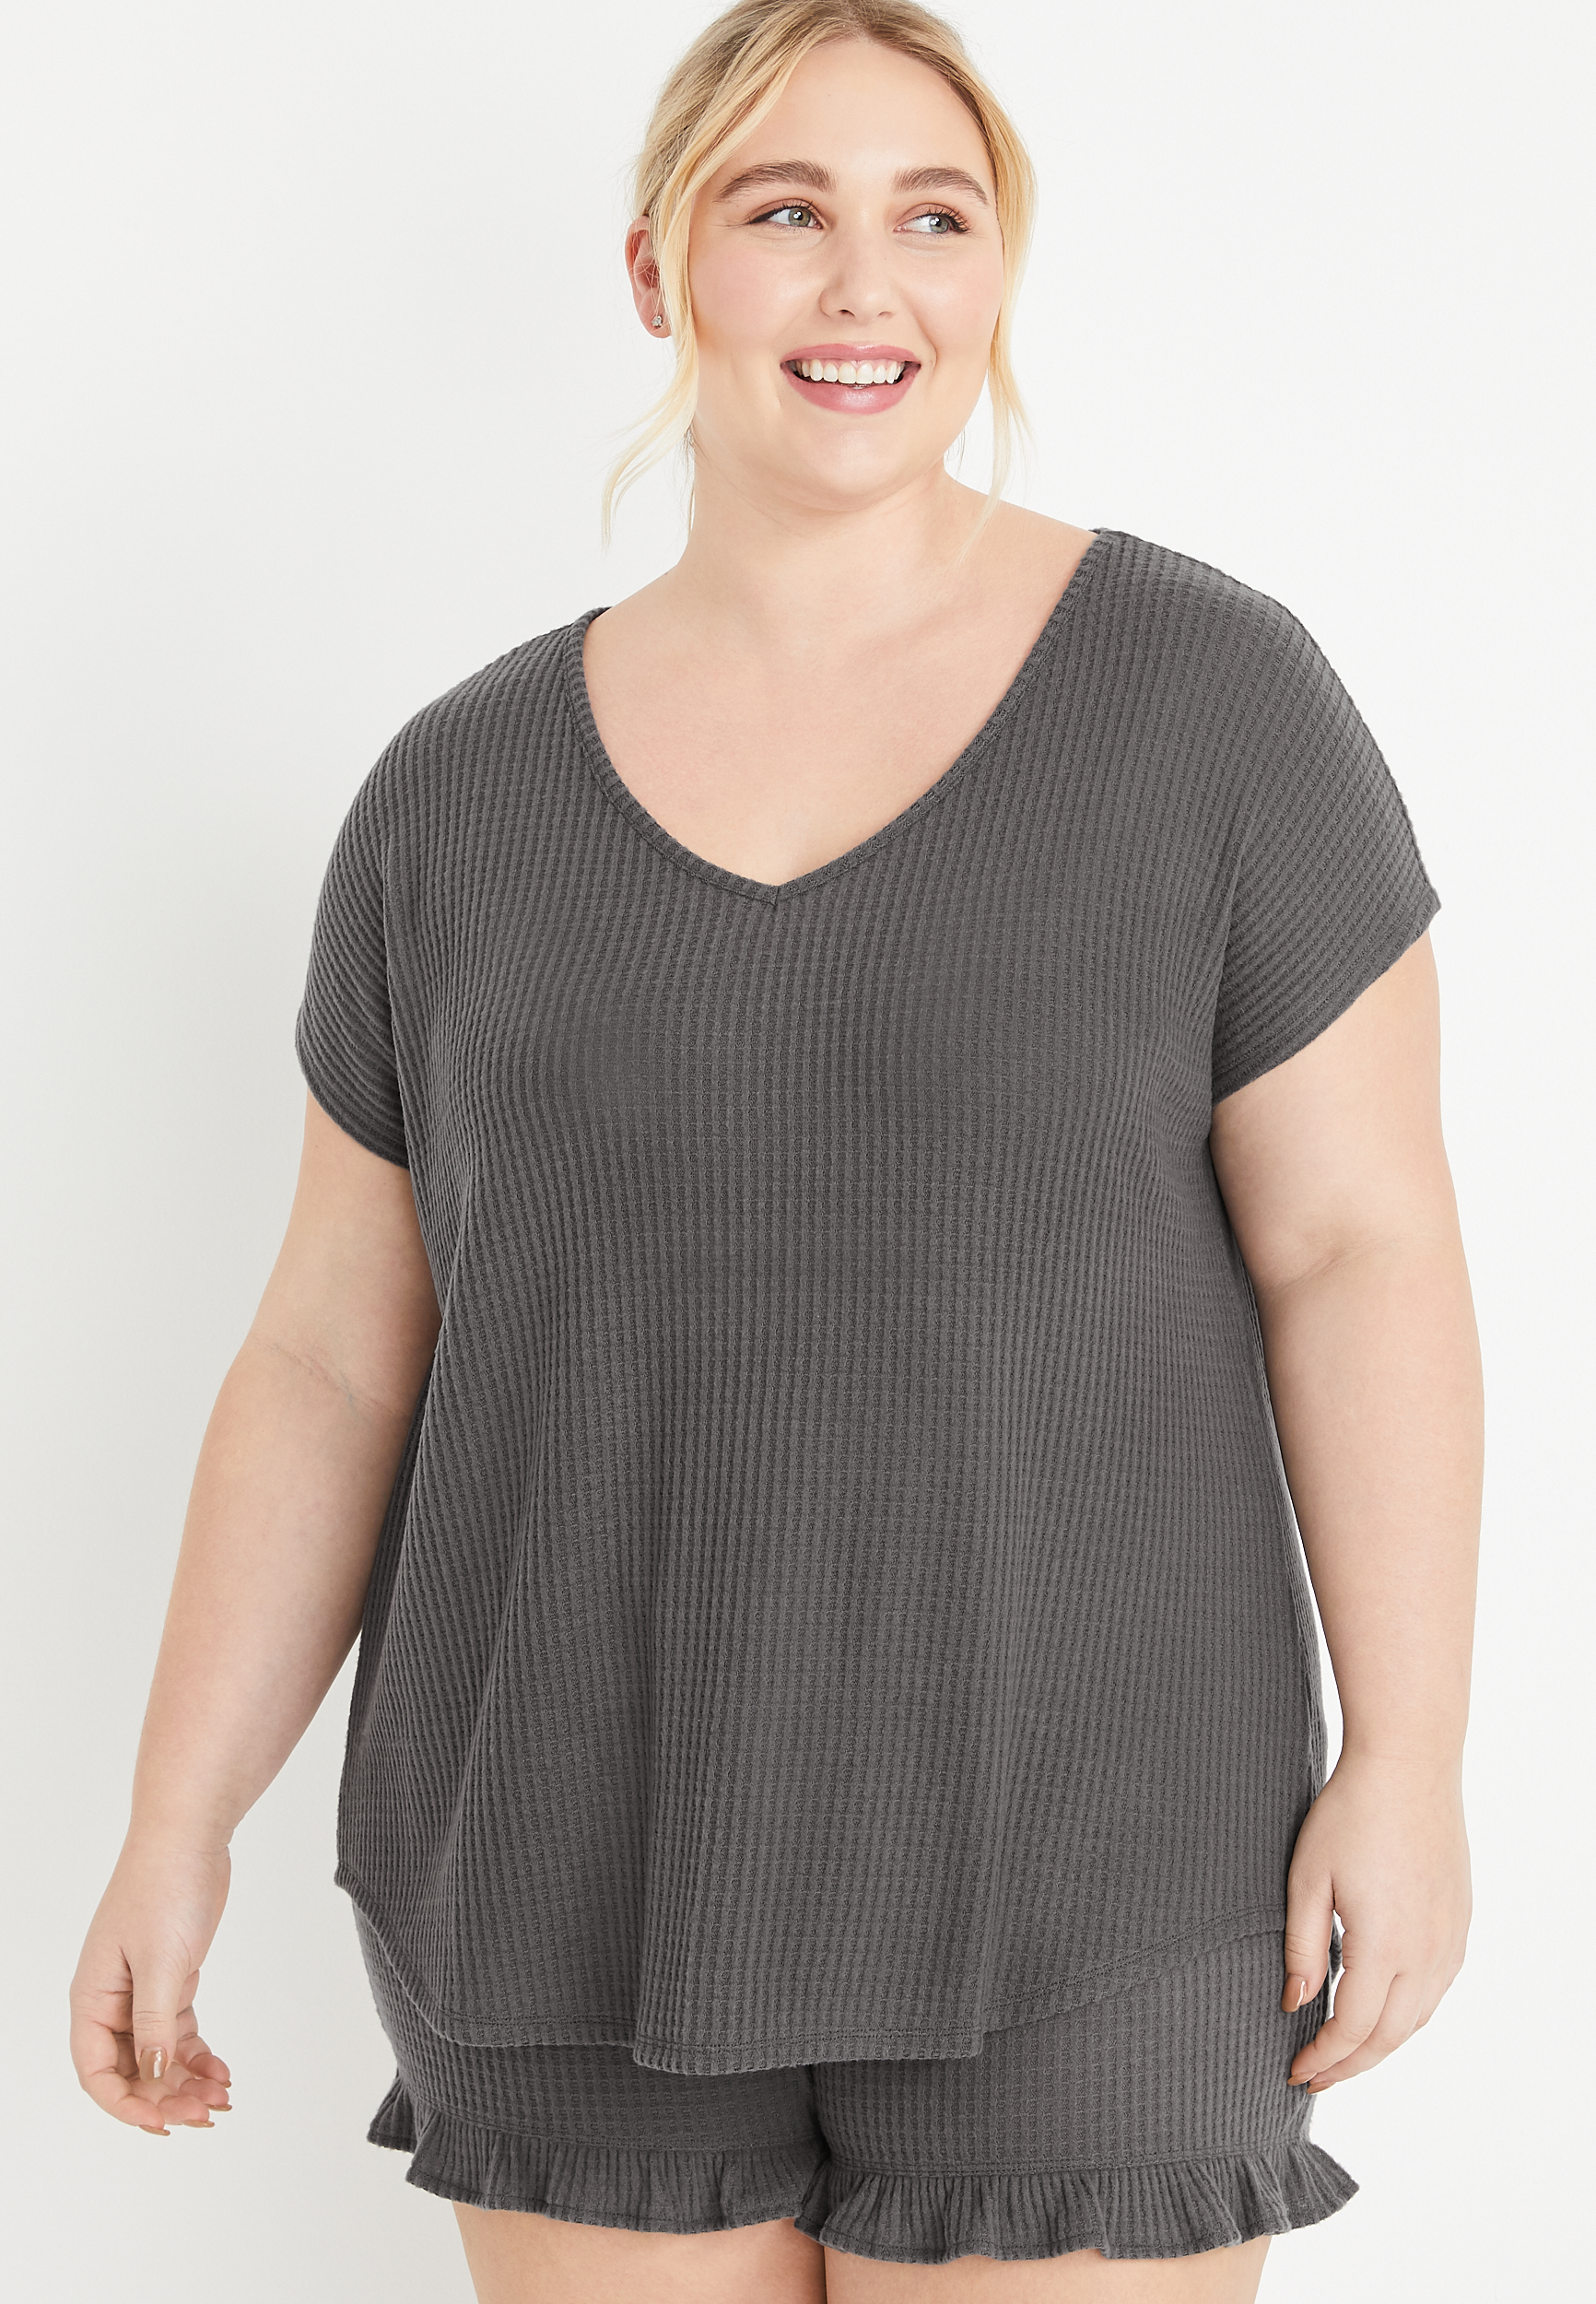 New Plus Size Tops For Sweaters, Tees & More | maurices